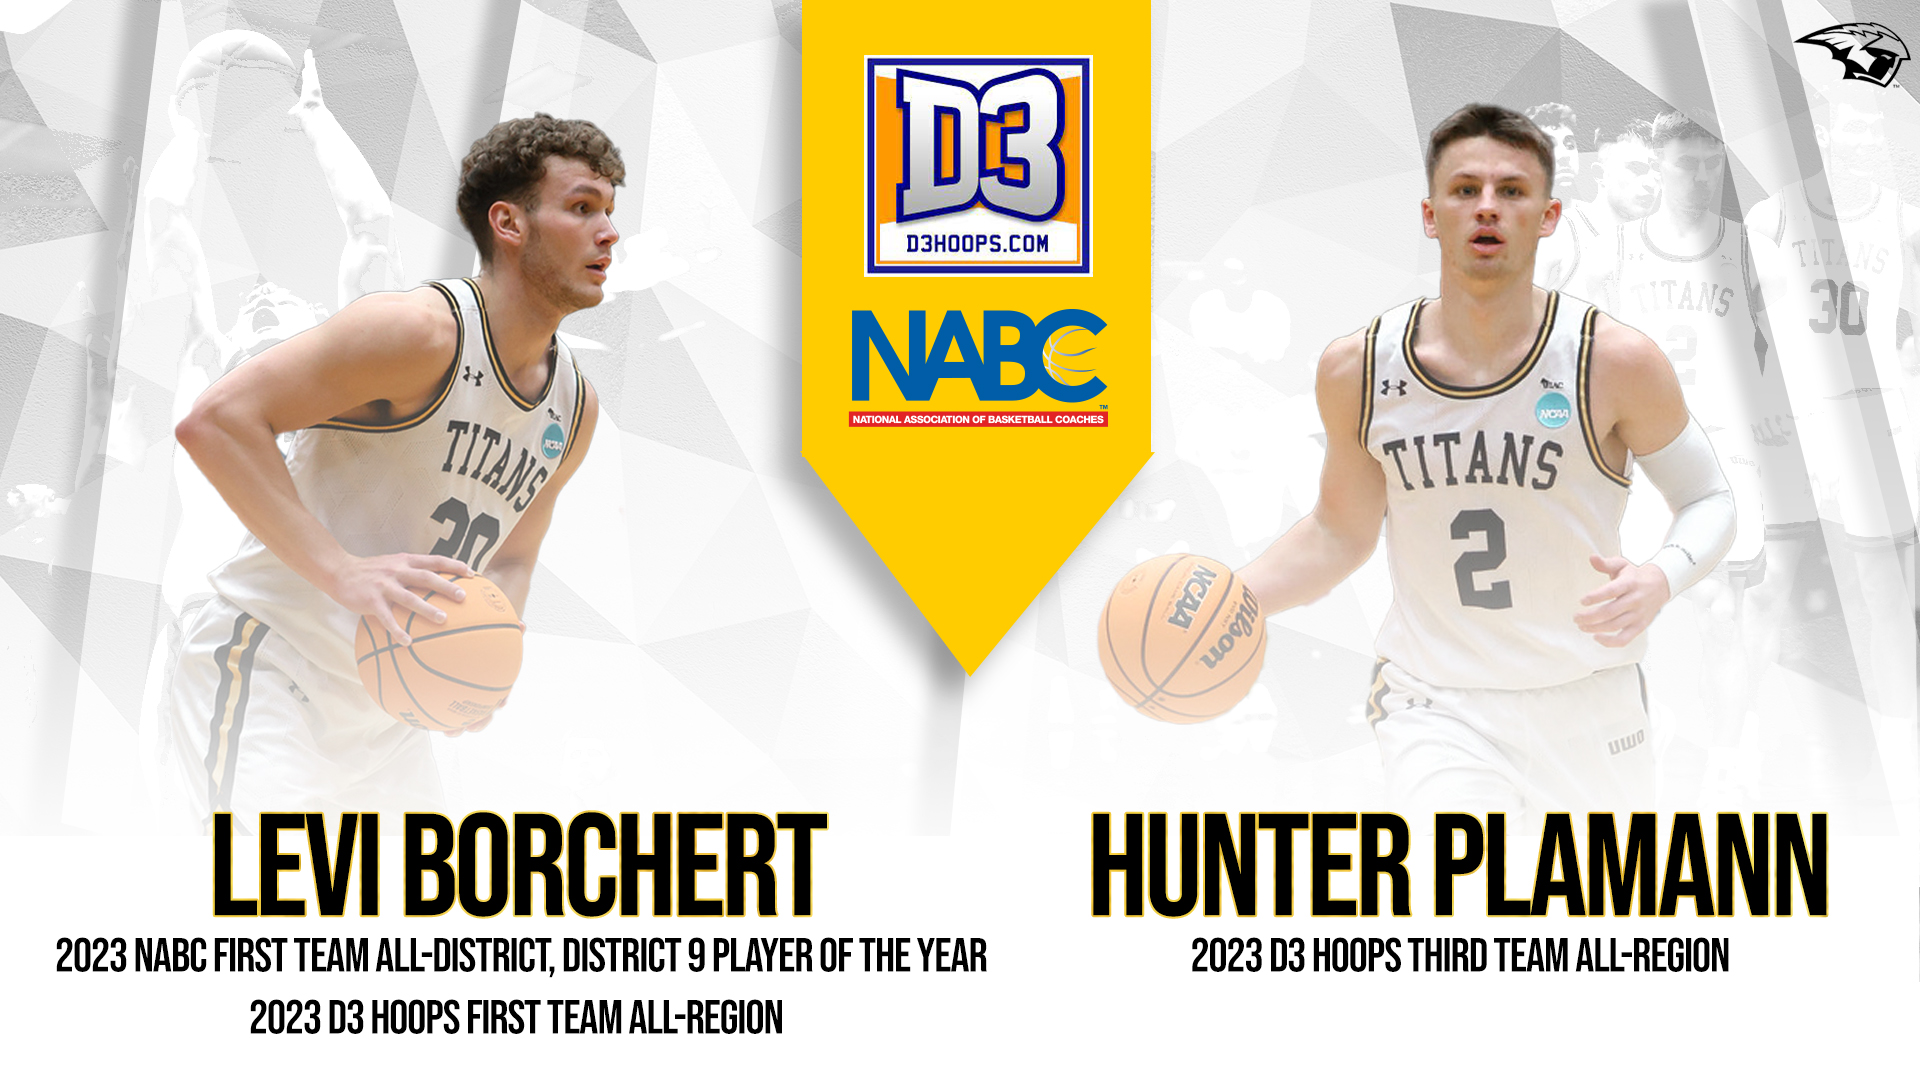 Borchert and Plamann Named to D3hoops Teams; Borchert Named to NABC First Team and Earns Player of the Year